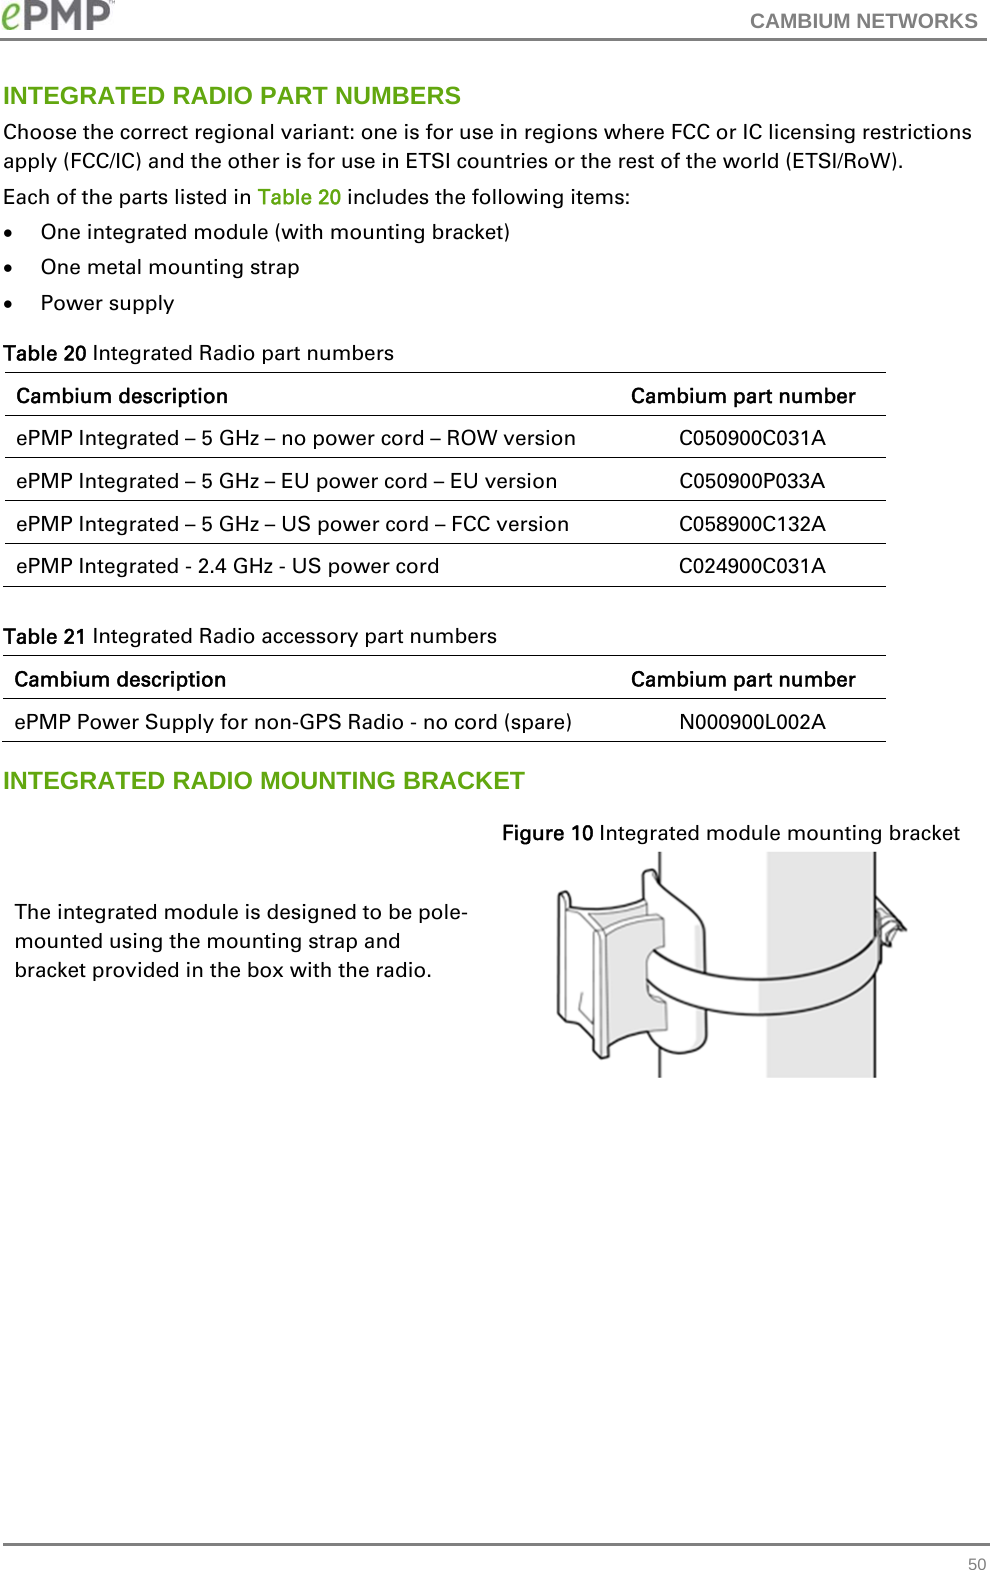 CAMBIUM NETWORKS   50INTEGRATED RADIO PART NUMBERS Choose the correct regional variant: one is for use in regions where FCC or IC licensing restrictions apply (FCC/IC) and the other is for use in ETSI countries or the rest of the world (ETSI/RoW). Each of the parts listed in Table 20 includes the following items:  One integrated module (with mounting bracket)  One metal mounting strap  Power supply Table 20 Integrated Radio part numbers Cambium description  Cambium part number ePMP Integrated – 5 GHz – no power cord – ROW version C050900C031A ePMP Integrated – 5 GHz – EU power cord – EU version  C050900P033A ePMP Integrated – 5 GHz – US power cord – FCC version C058900C132A ePMP Integrated - 2.4 GHz - US power cord  C024900C031A Table 21 Integrated Radio accessory part numbers Cambium description  Cambium part number ePMP Power Supply for non-GPS Radio - no cord (spare) N000900L002A INTEGRATED RADIO MOUNTING BRACKET The integrated module is designed to be pole-mounted using the mounting strap and bracket provided in the box with the radio.   Figure 10 Integrated module mounting bracket   